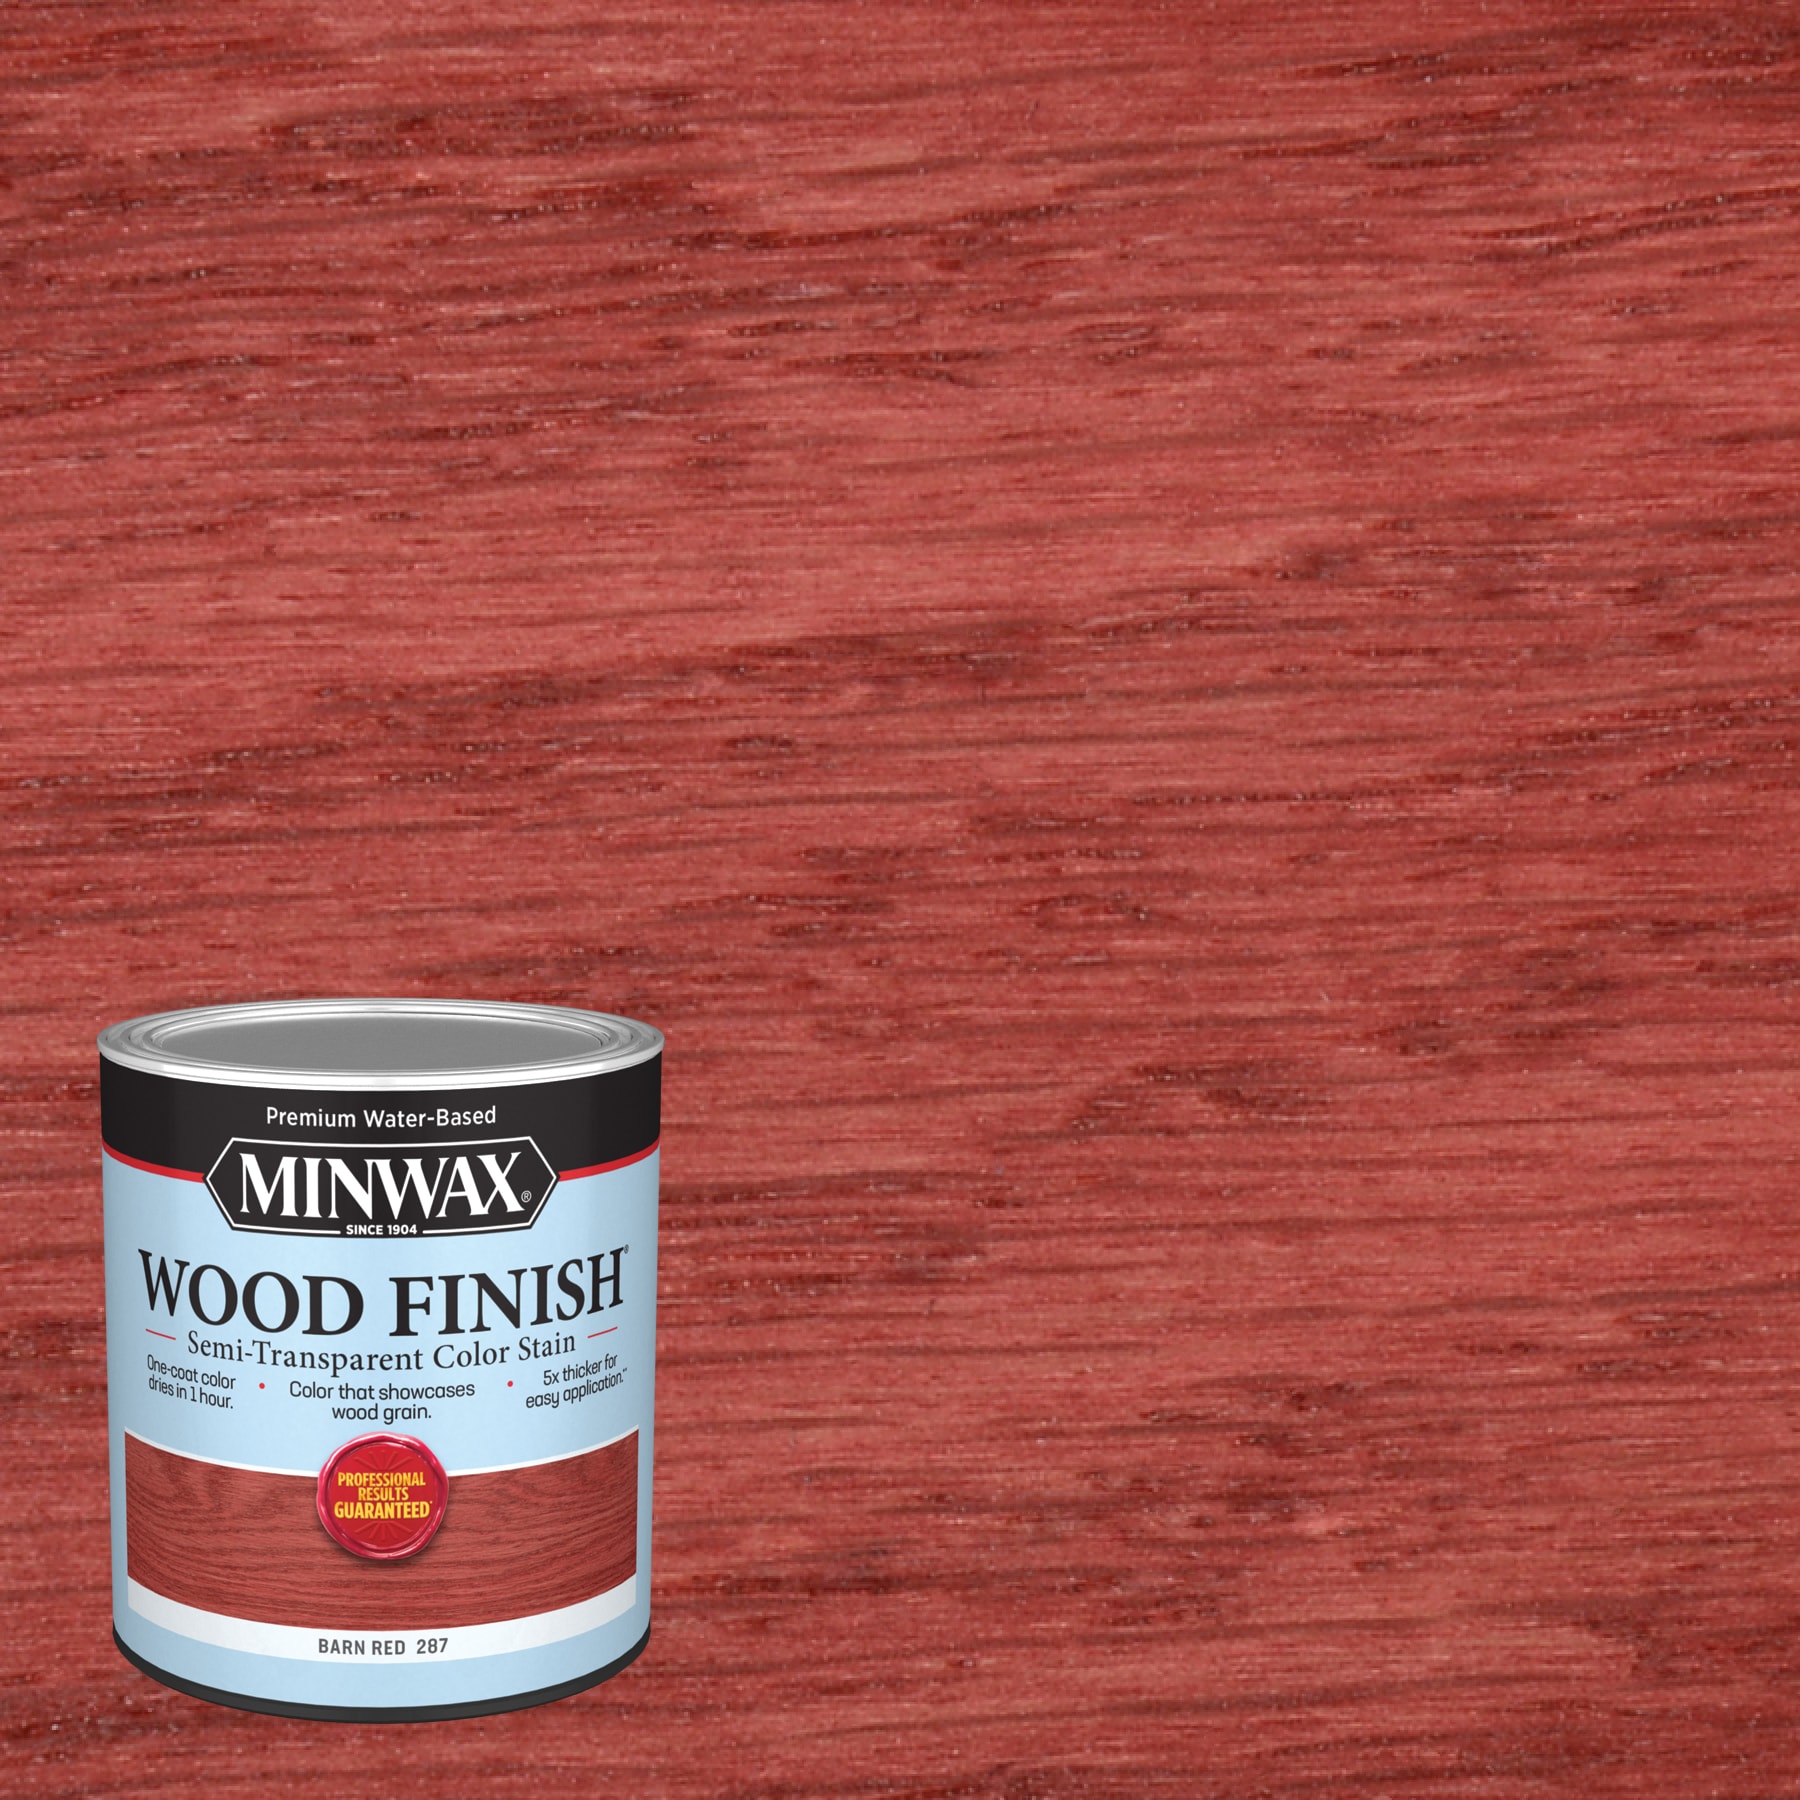 Bright Red Wood Stain - Protek Wood Stain